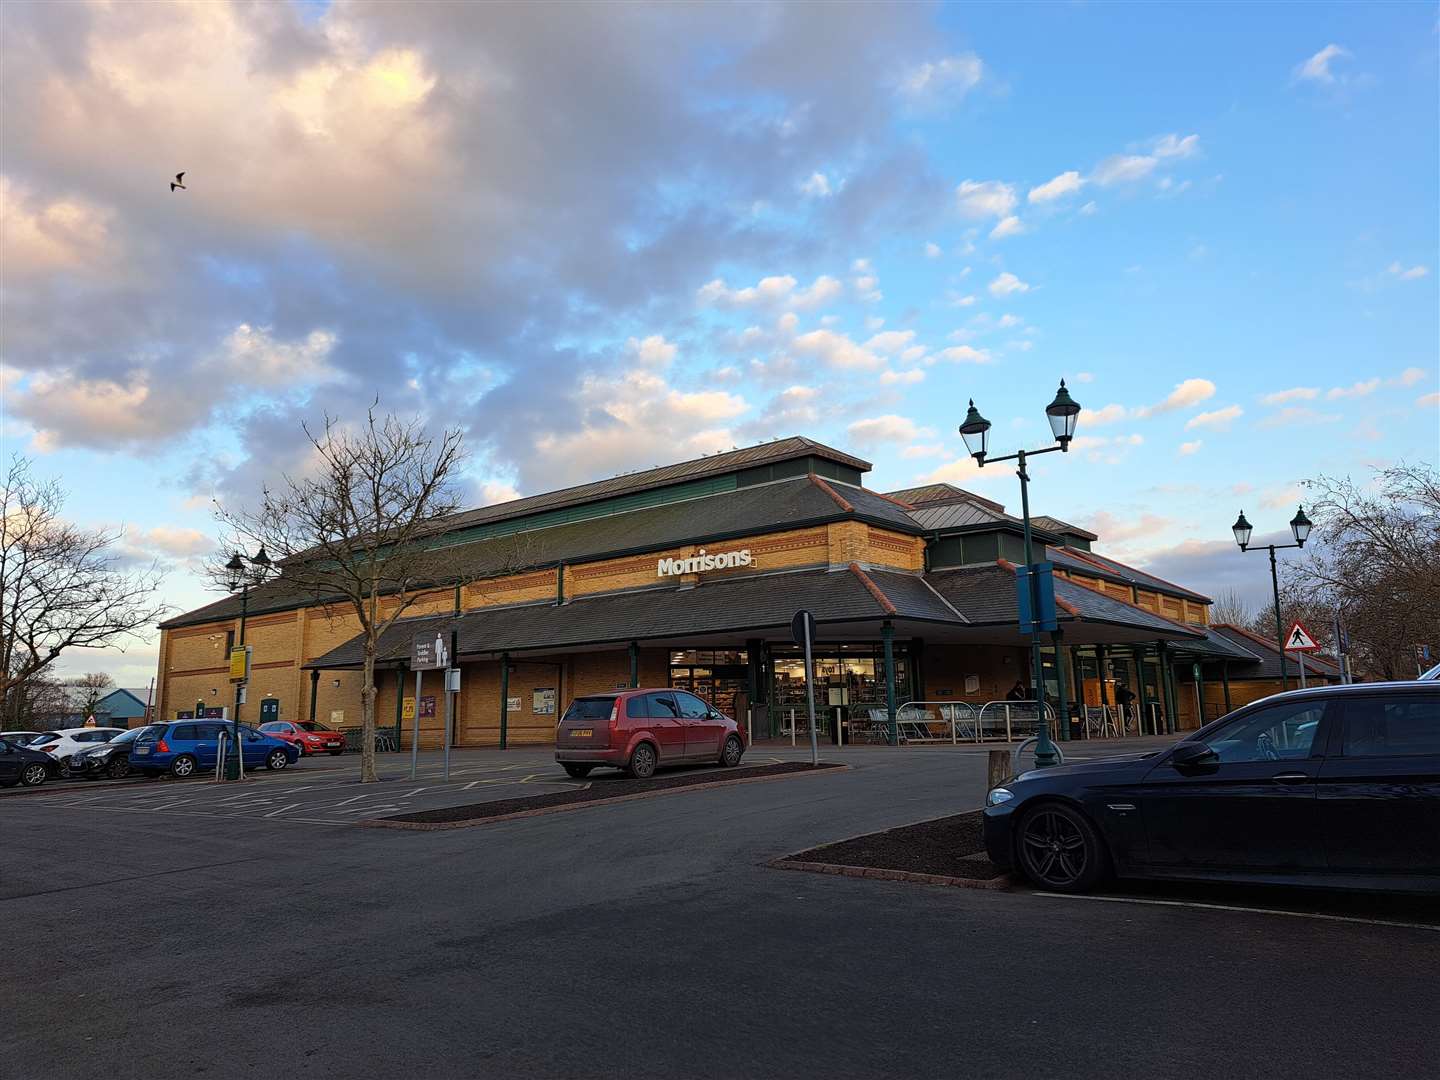 Faversham Morrisons has installed an ANPR system without planning permission and is now seeking retrospective permission